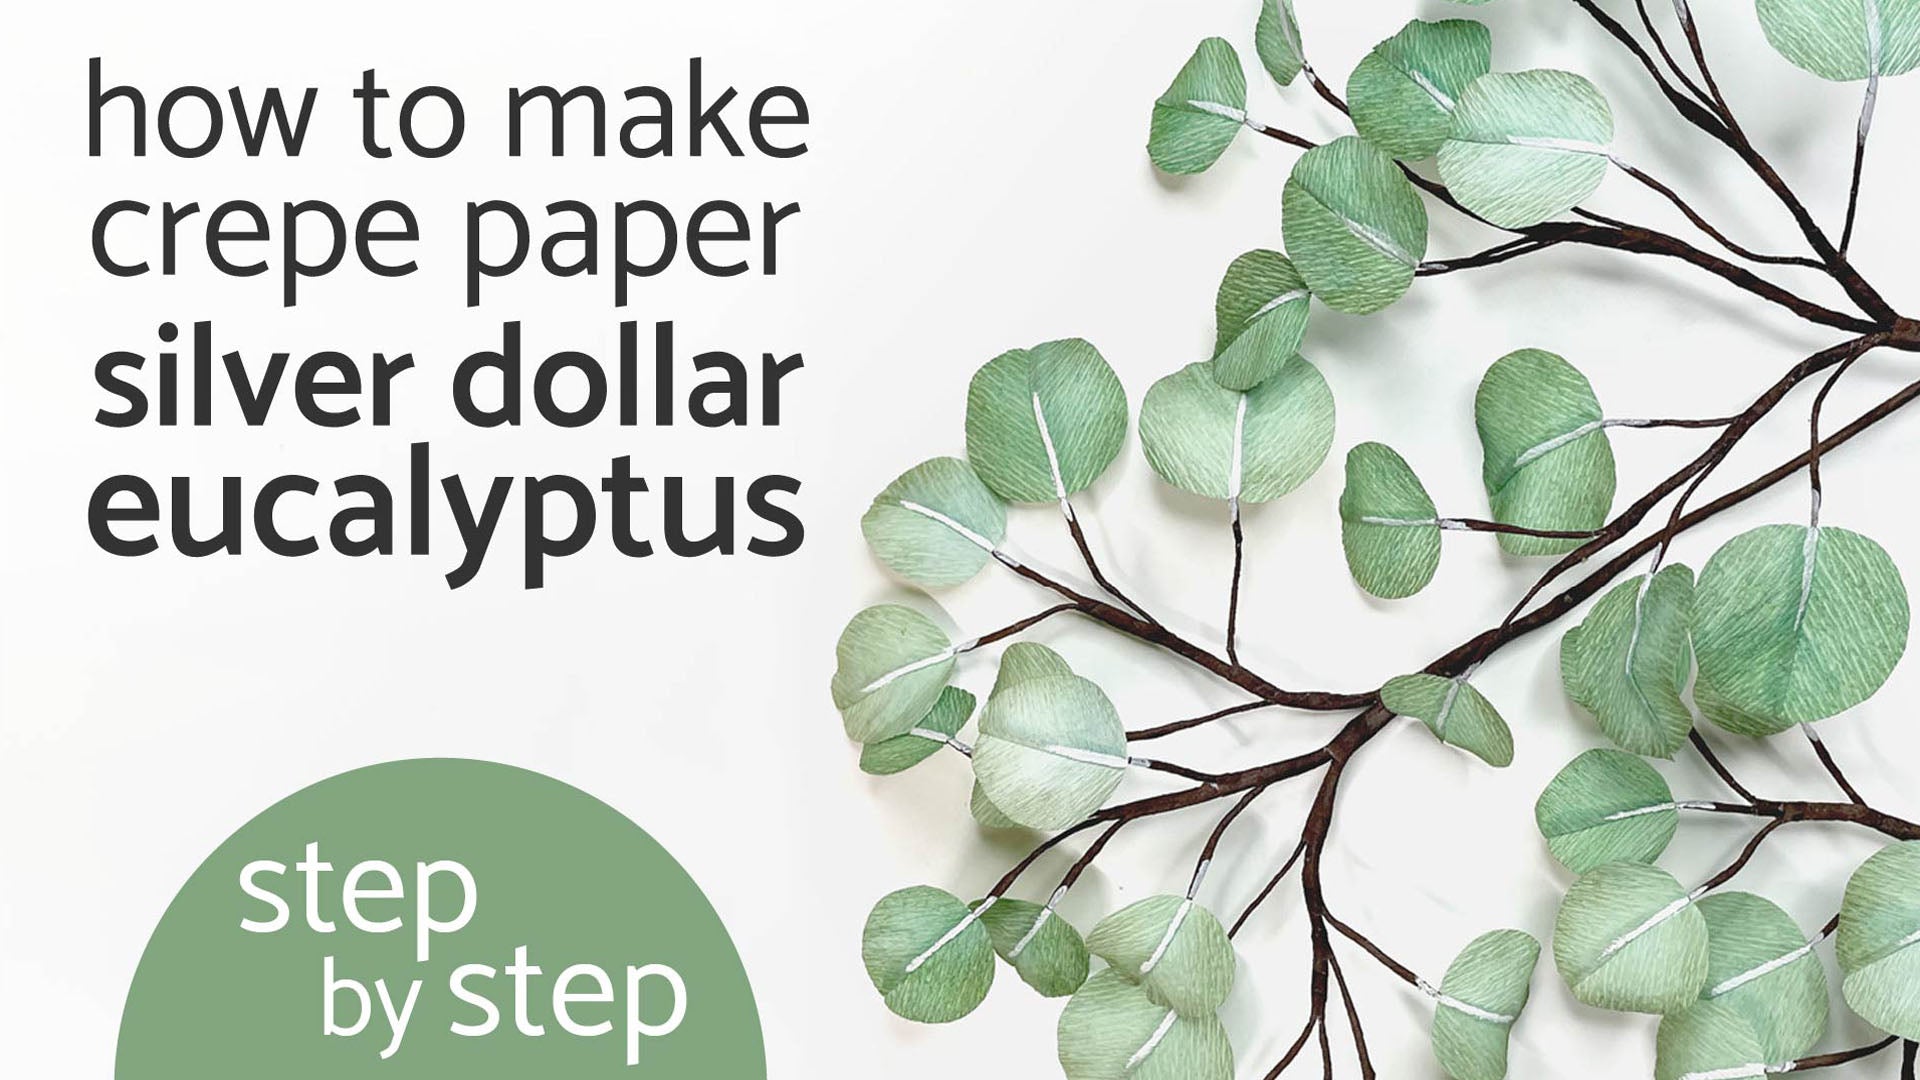 Load video: how to make paper eucalyptus